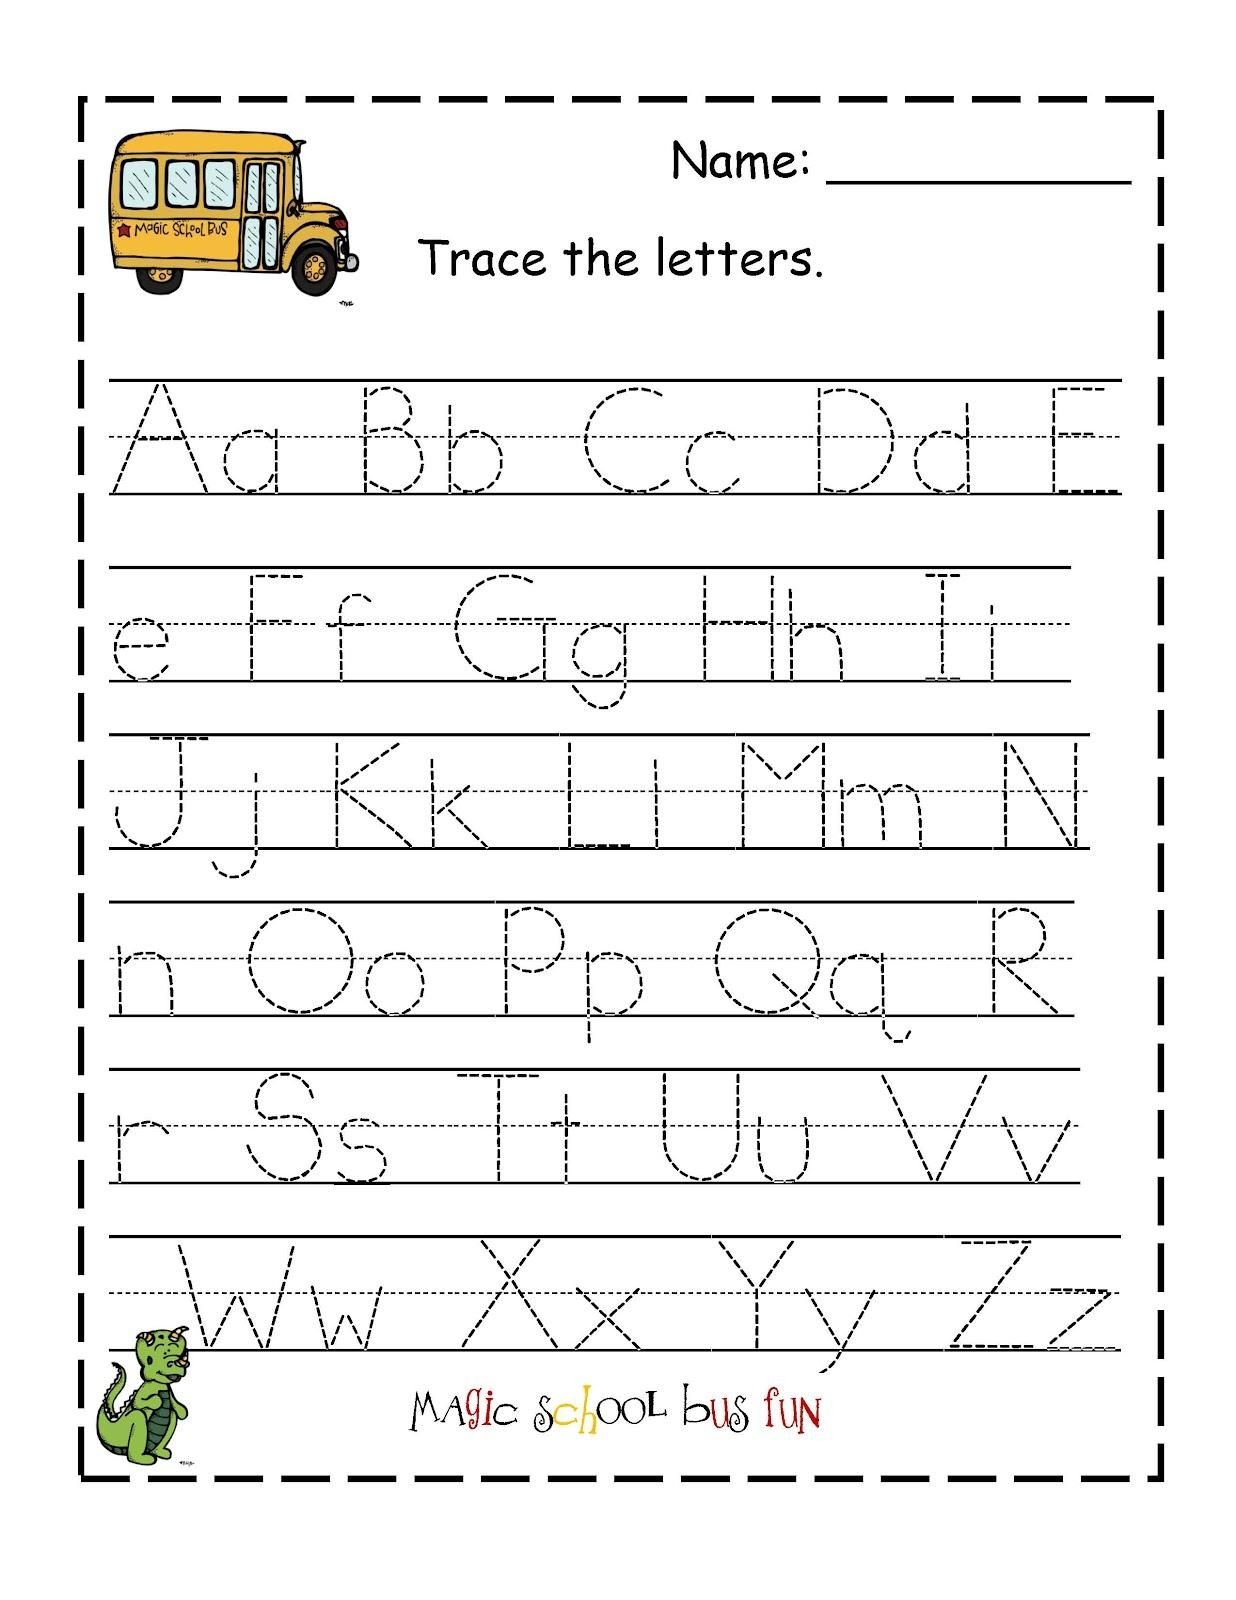 Free Printable Abc Tracing Worksheets #2 | Places To Visit - Free Abc Printables For Kindergarten